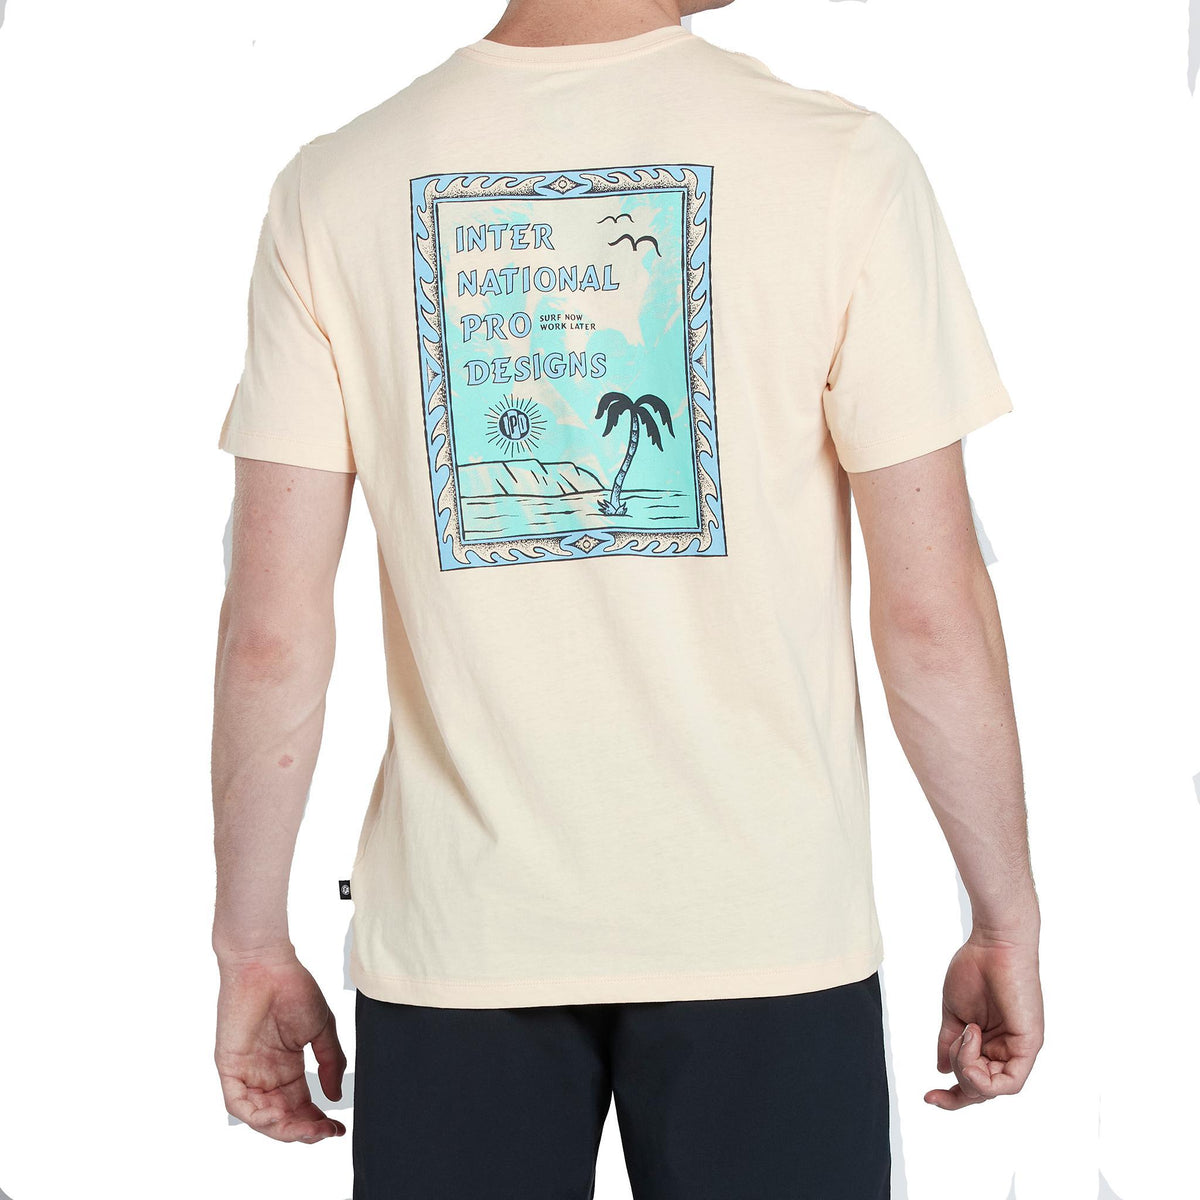 modeling showing the rear view of the mens framed super soft s/s tee in sherbert. showing the large rear graphic of stamp with international pro designs by a palm tree